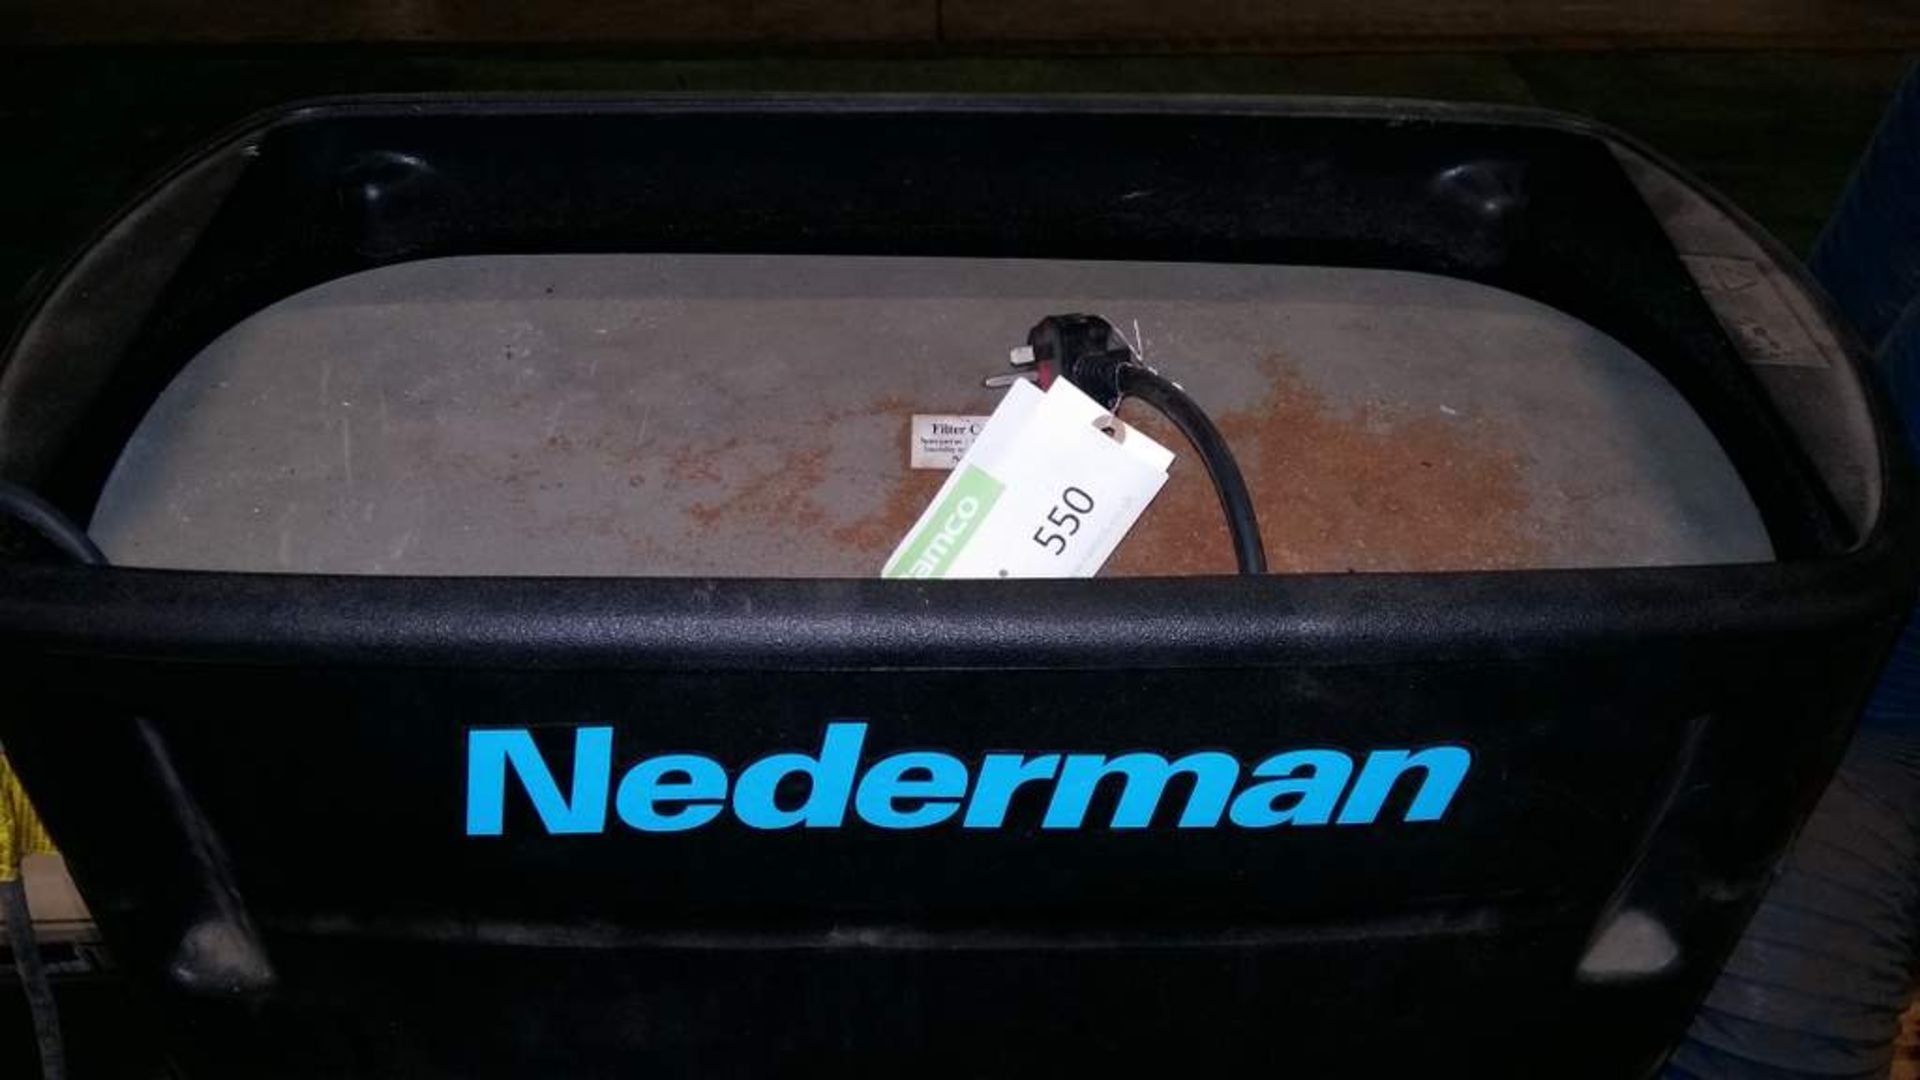 Nederman portable fume extractor - 230v - Image 6 of 7